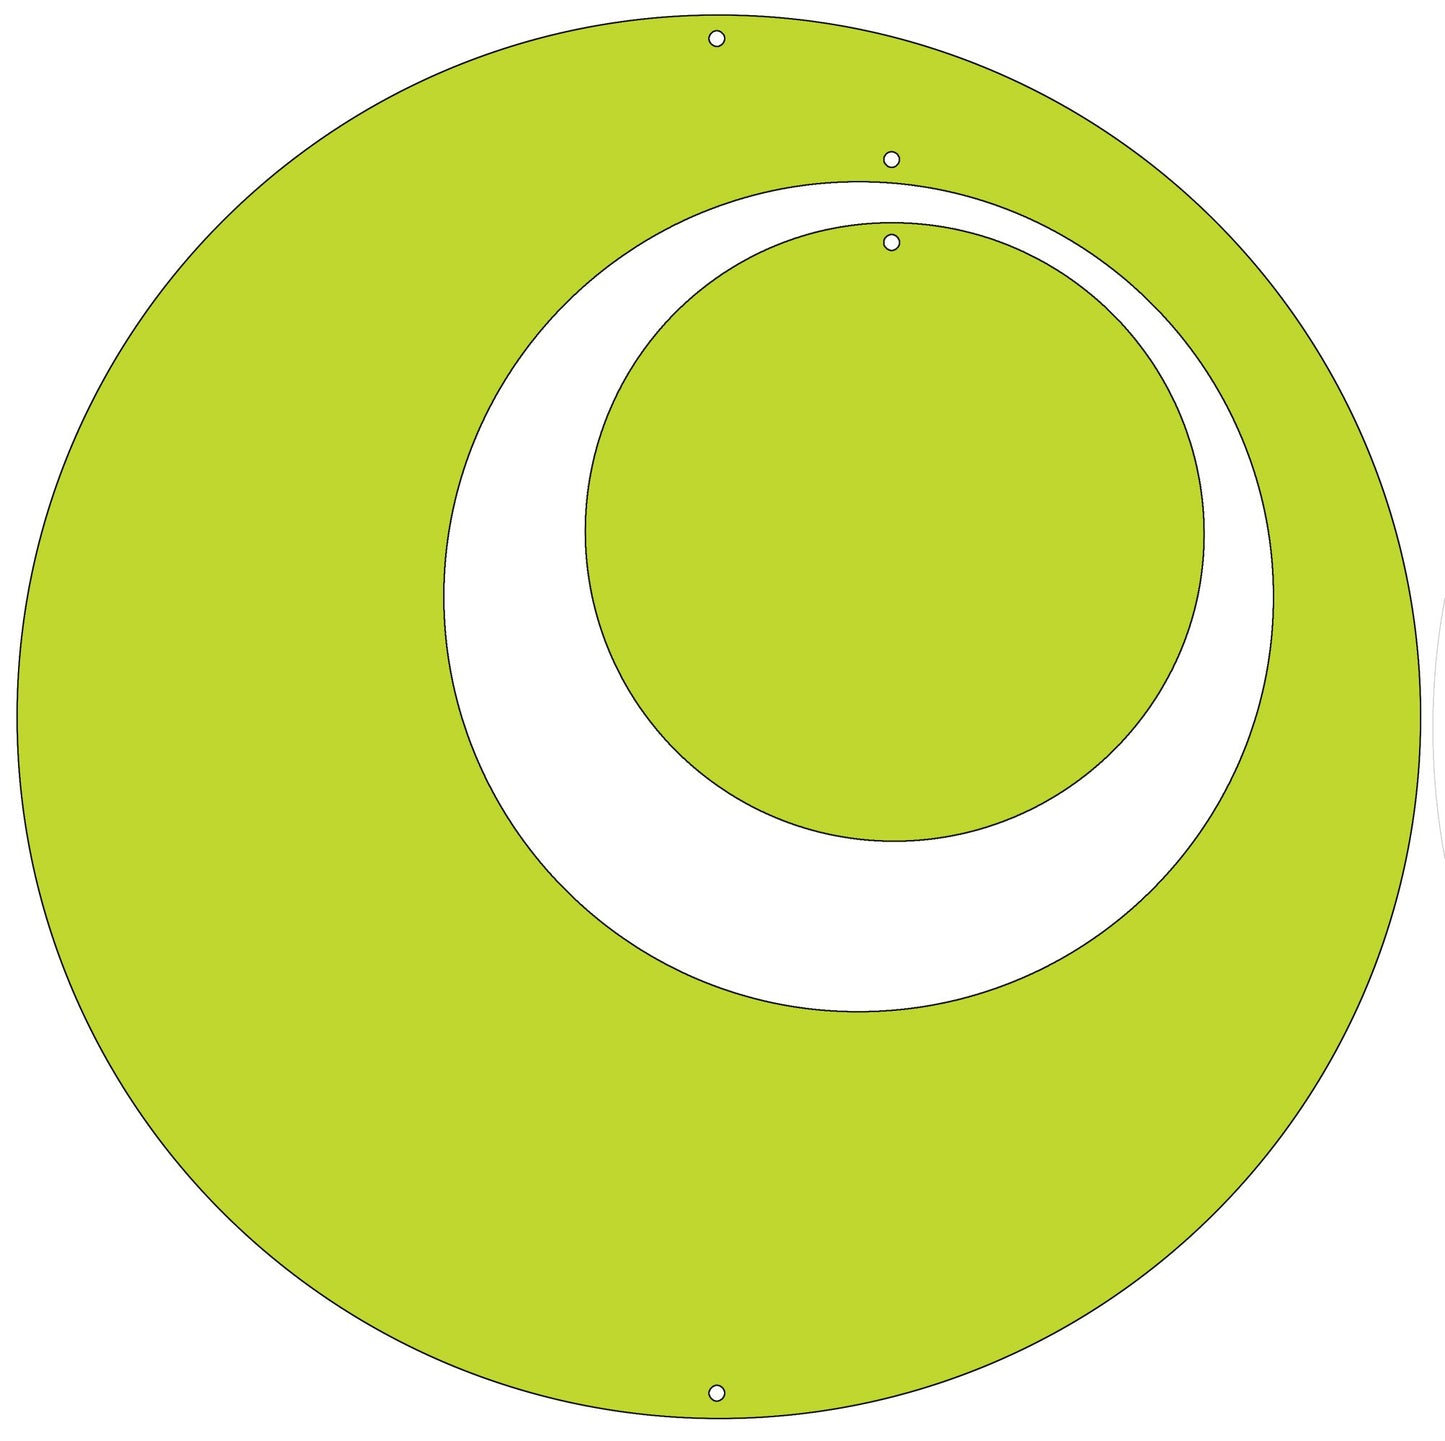 Lime Green Circle Set for Groovy Atomic Screens - Room Dividers, Partitions, Curtains, and Window Treatments by AtomicMobiles.com